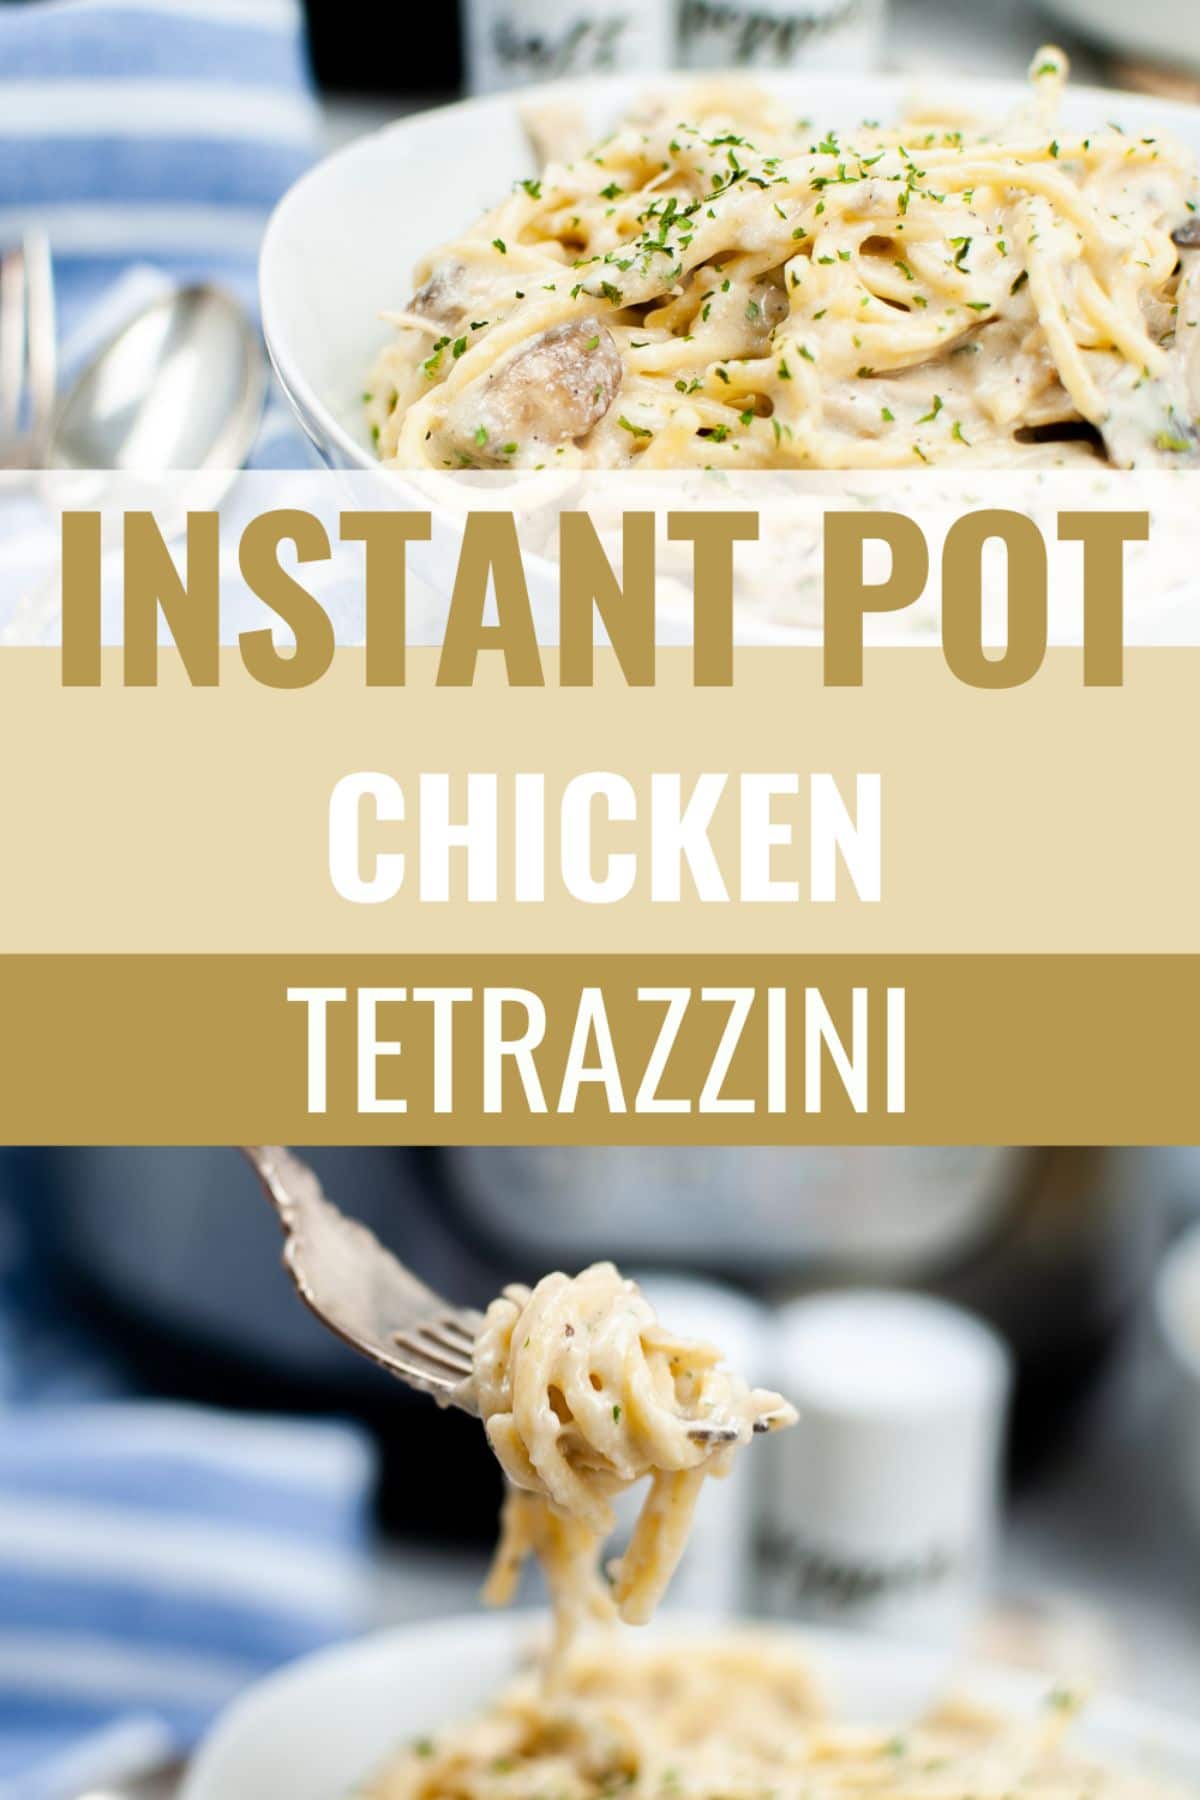 If you like creamy, cheesy pasta dishes & getting cozy with your pressure cooker, then this Instant Pot Chicken Tetrazzini recipe is for you. #instantpot #pressurecooker #chickentetrazzini #chicken #recipe via @wondermomwannab